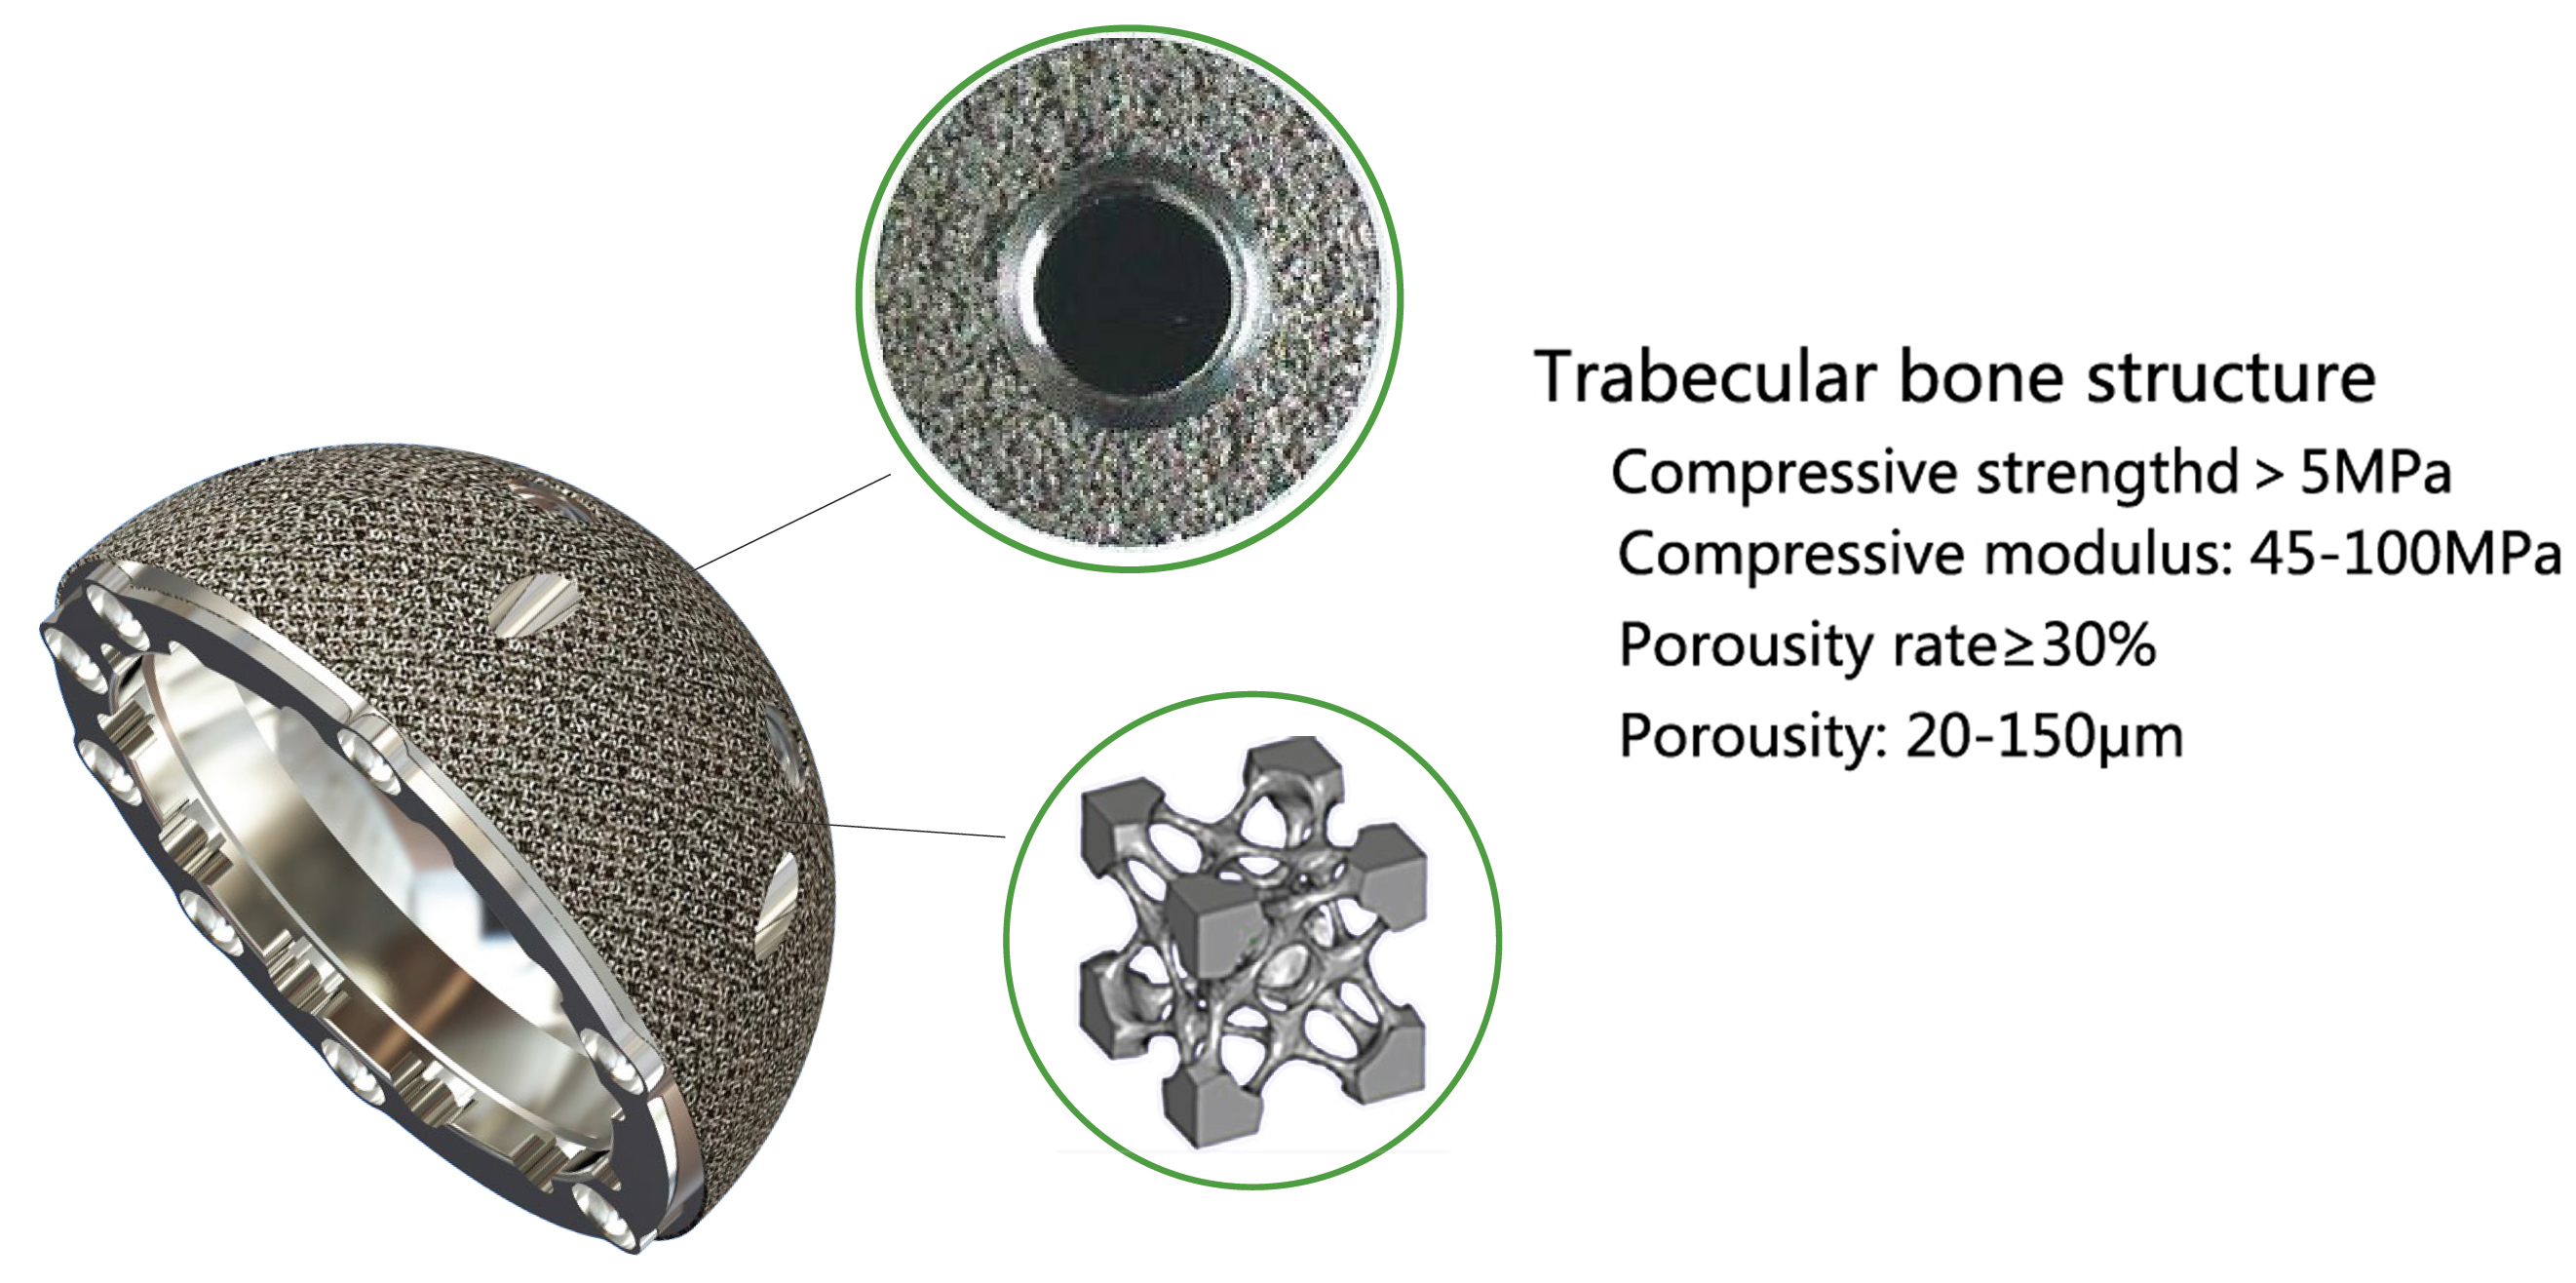 SEE® Trabecular Acetabular Cup System